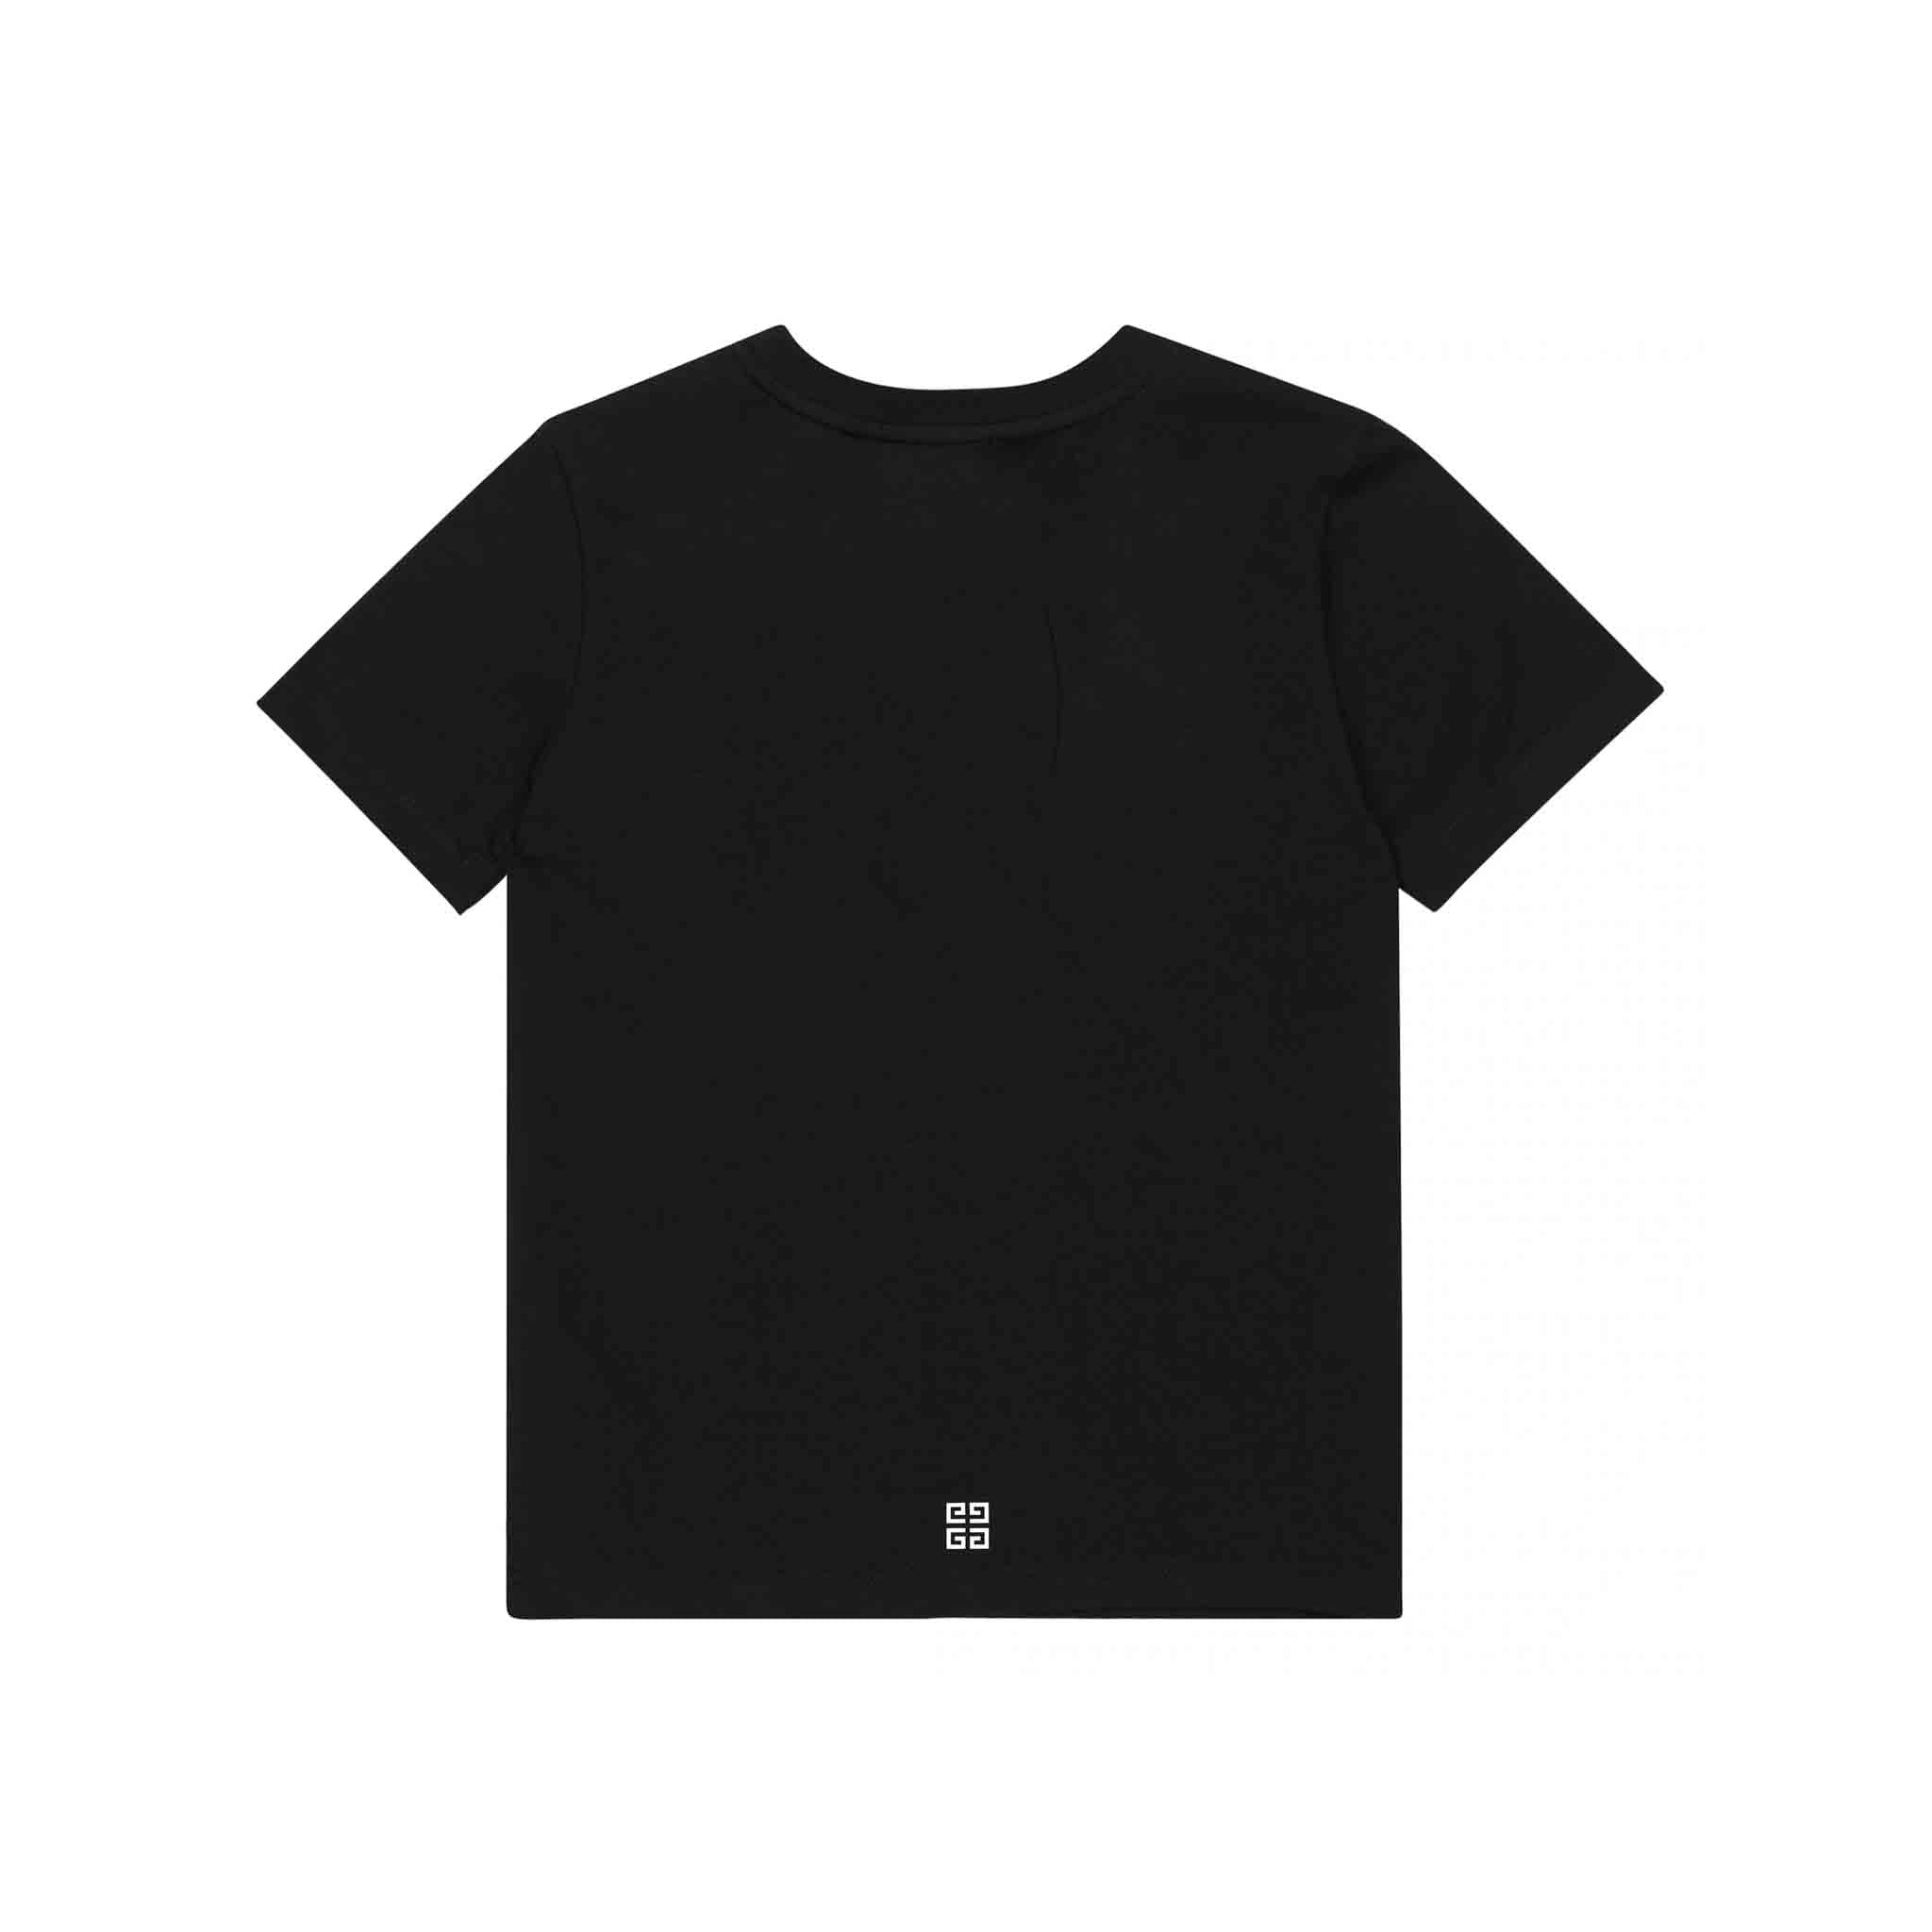 Givenchy Archetype Slim Fit T-Shirt in Black